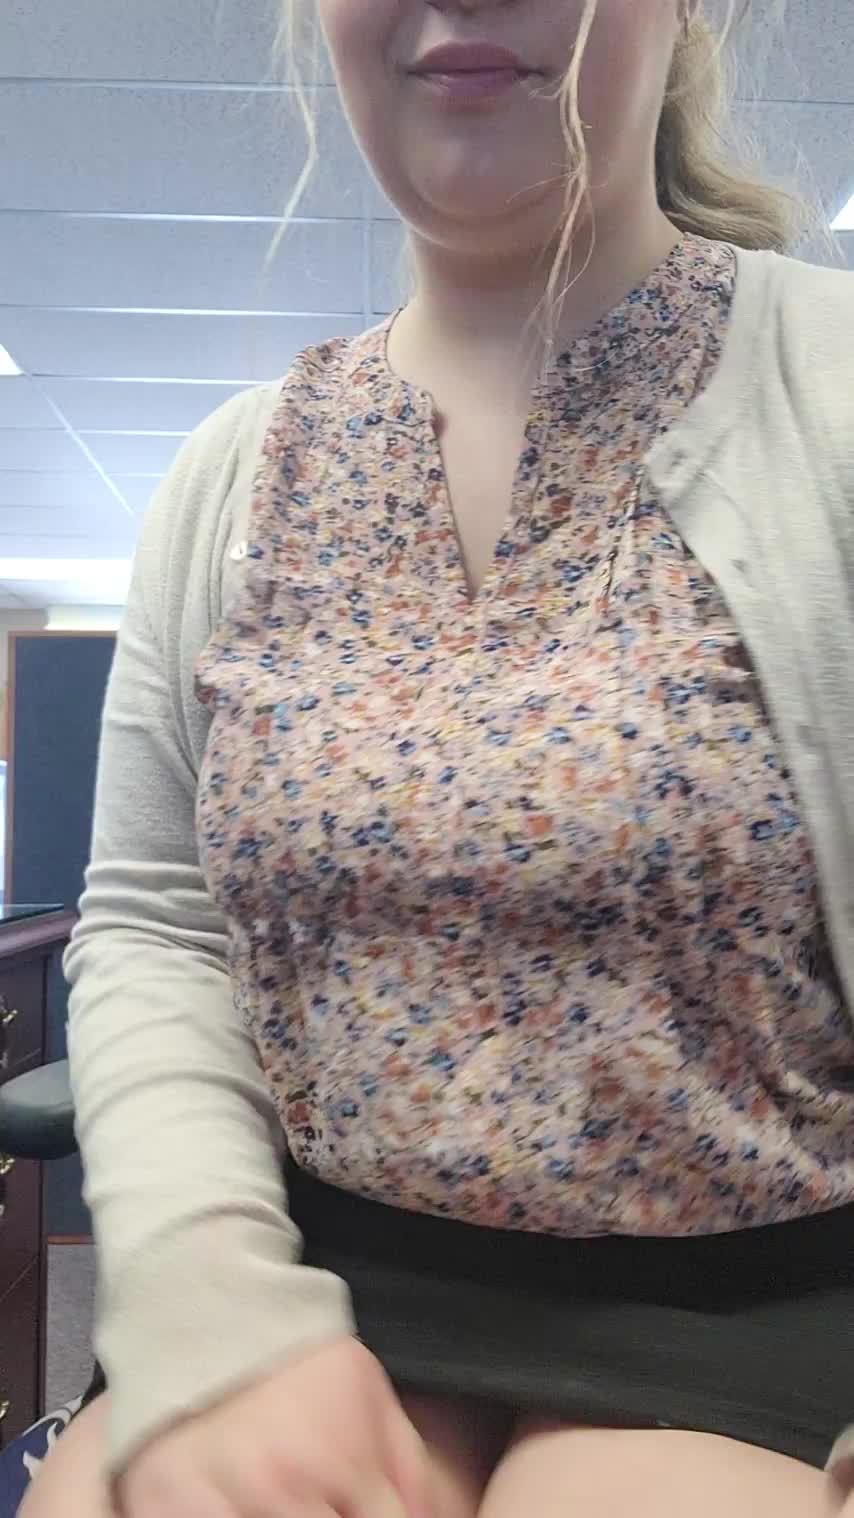 Would you sneak a peak if you saw me lifting my skirt at work? : video clip